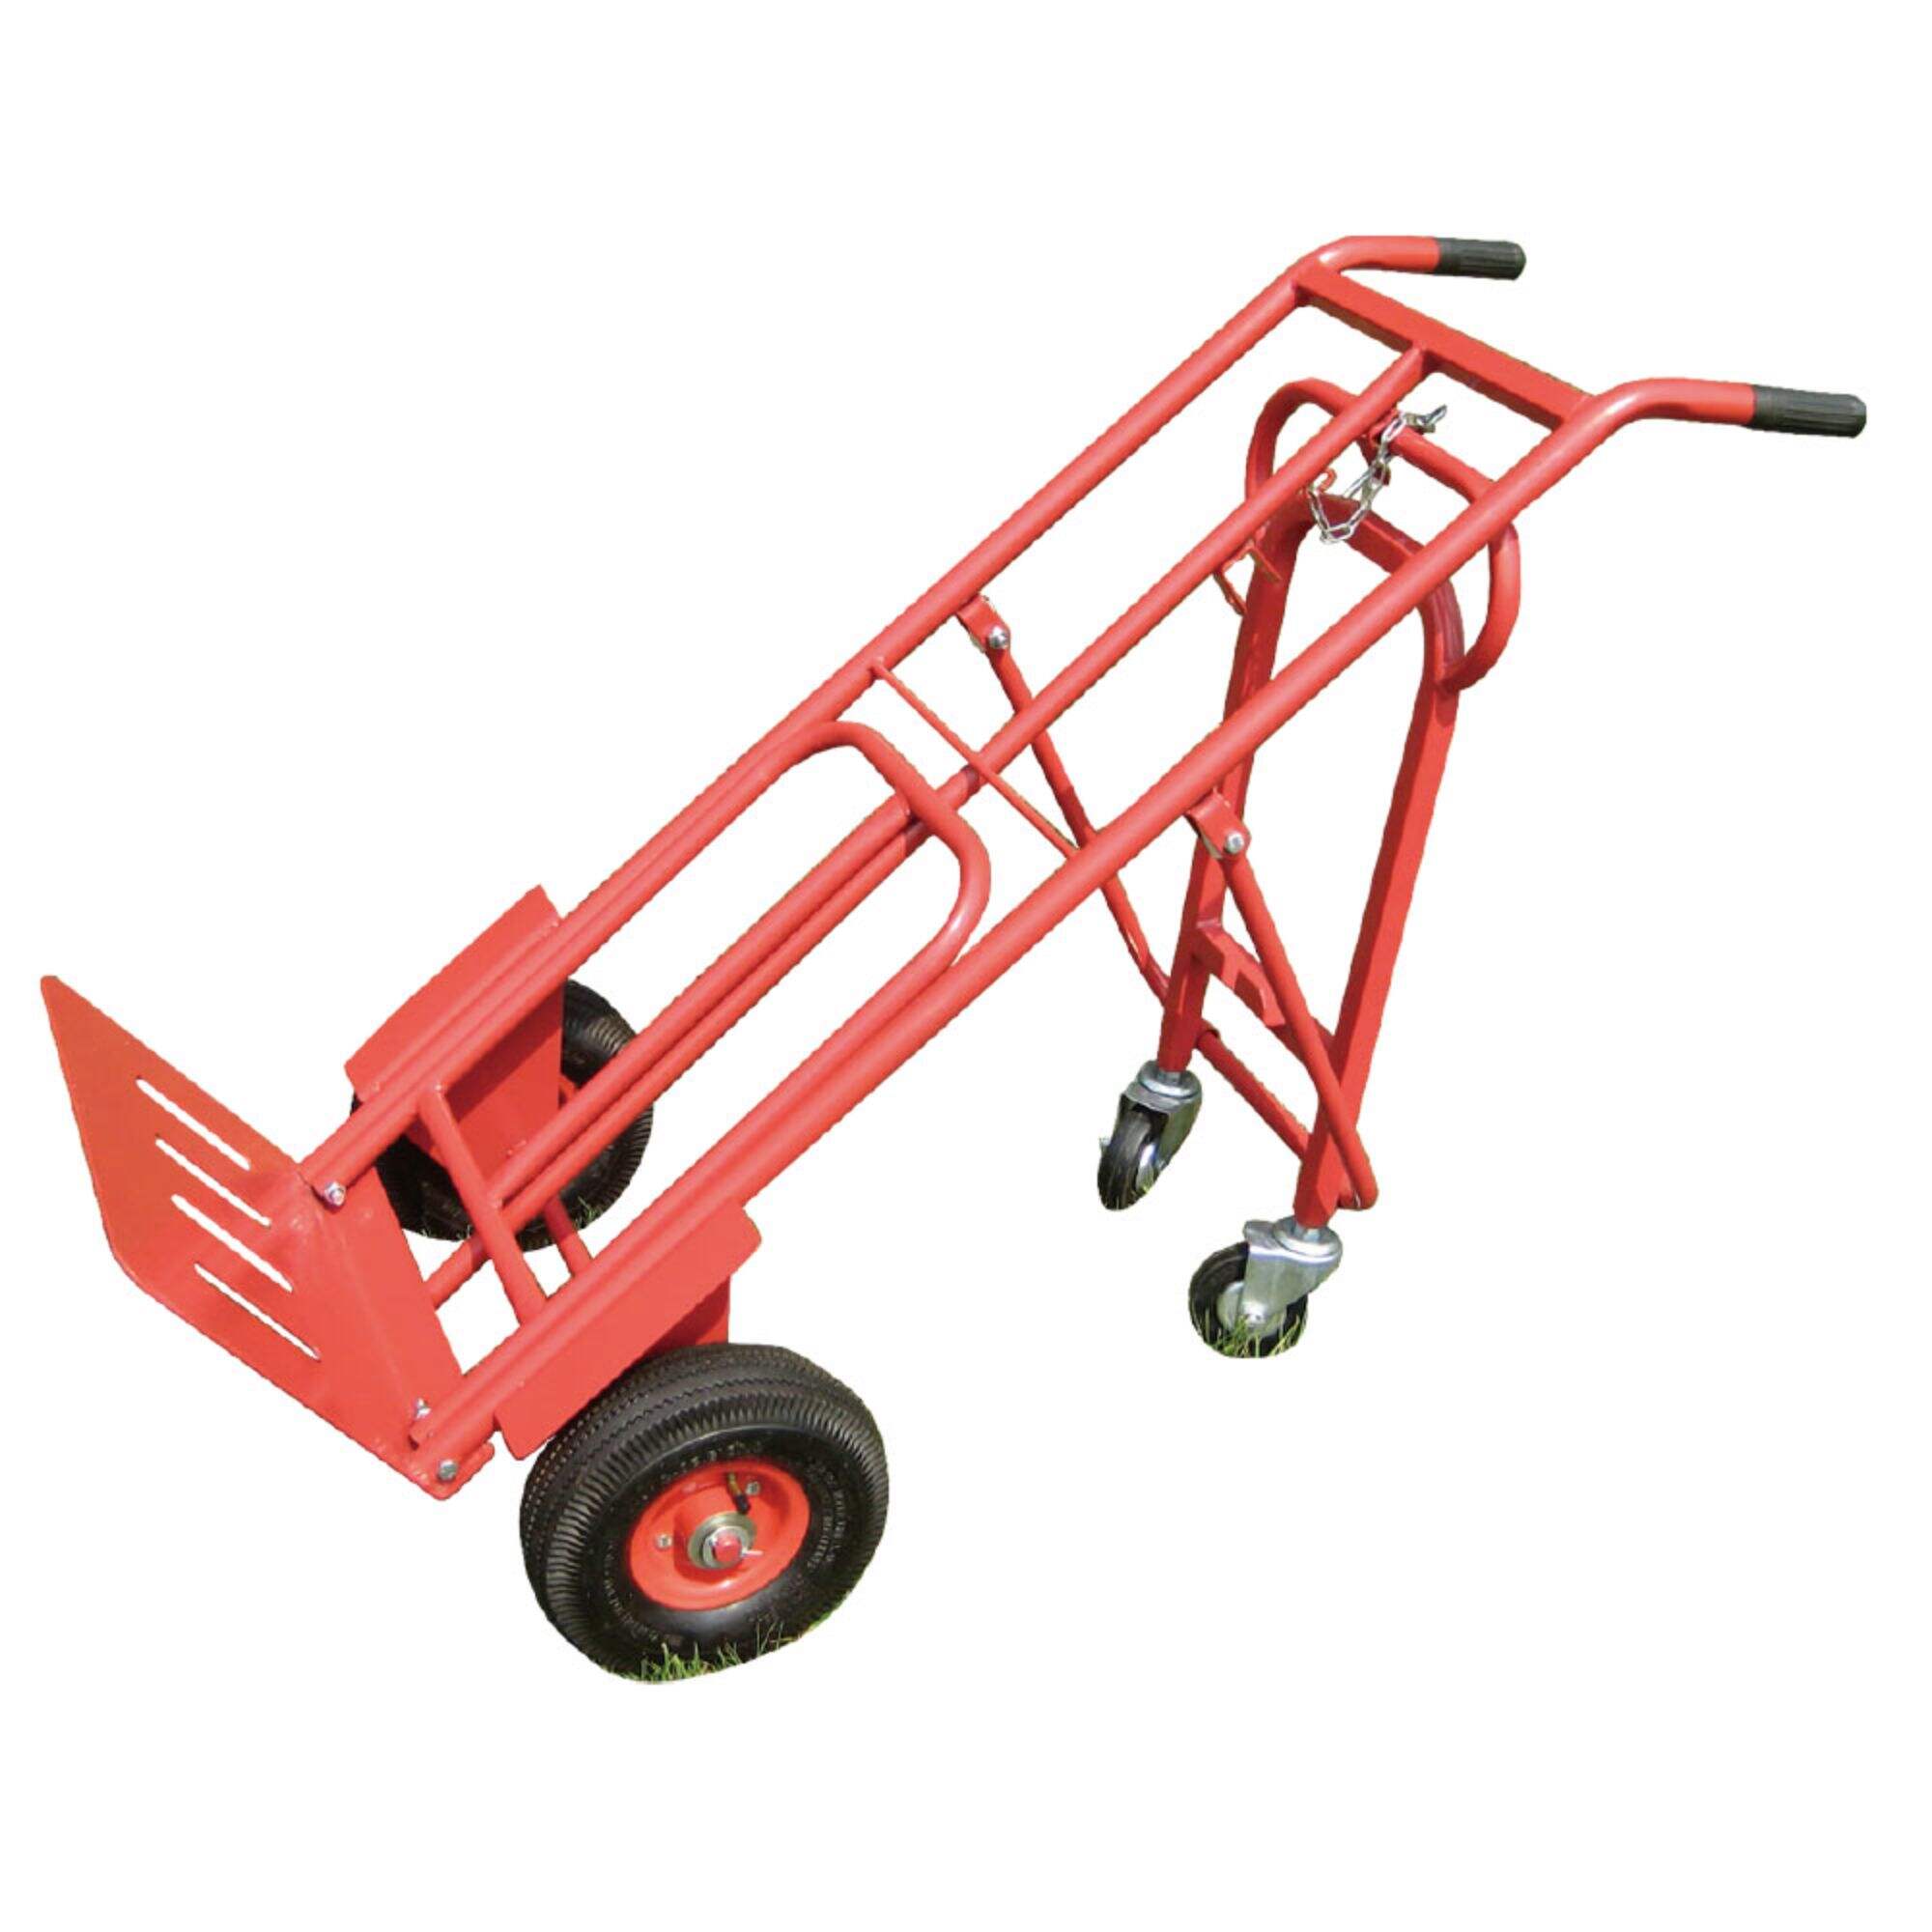 HT1824 Steel Hand Truck, Hand Dolly Cart Trolley, with 10x3.5 inch Pneumatic Wheel